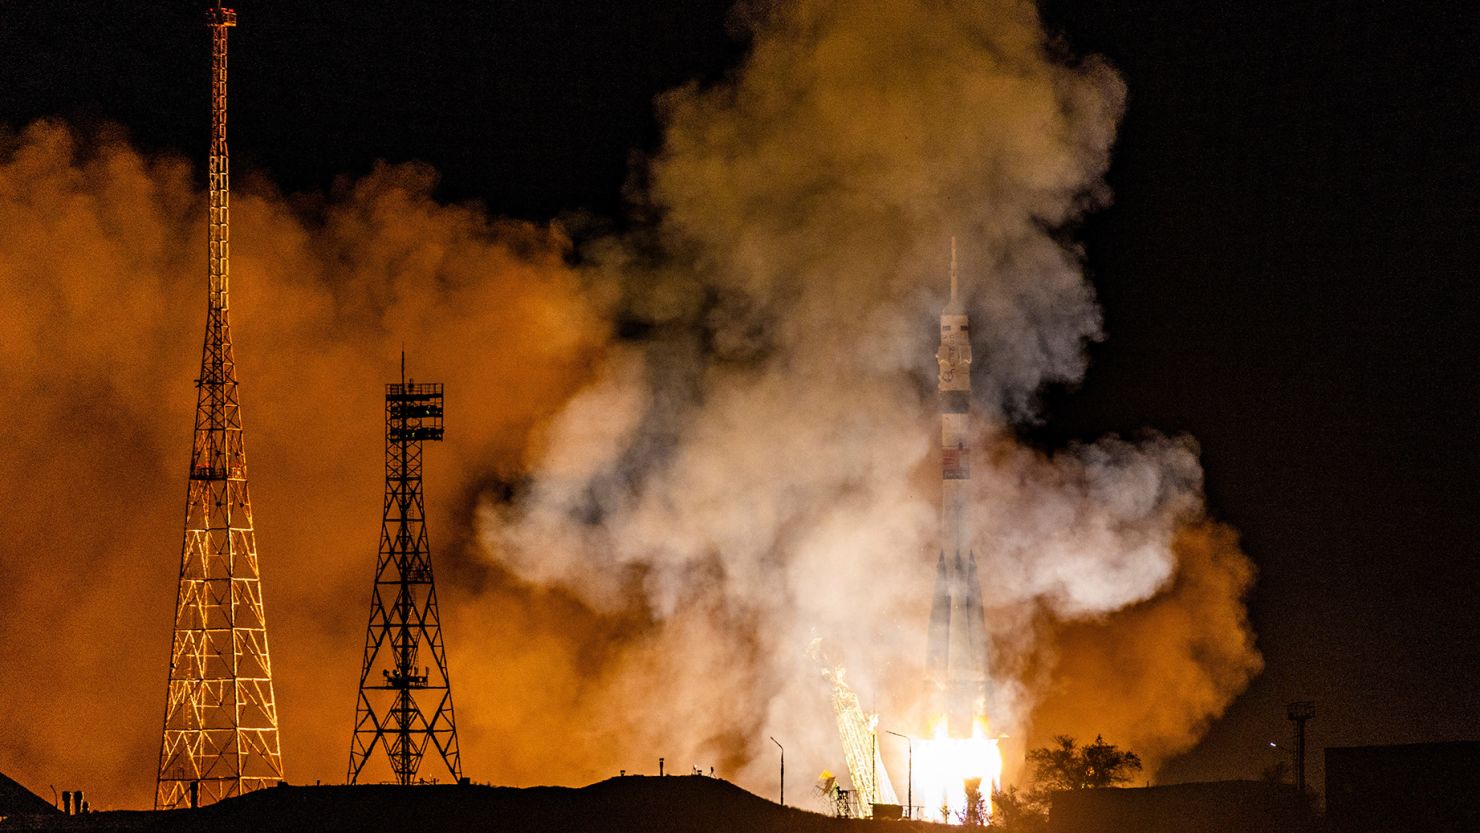 The Soyuz MS-24 spacecraft carrying the crew formed of NASA astronaut Loral O'Hara, Roscosmos cosmonauts Oleg Kononenko and Nikolai Chub blasts off to the International Space Station (ISS) from the launchpad at the Baikonur Cosmodrome, Kazakhstan September 15, 2023. REUTERS/Maxim Shemetov